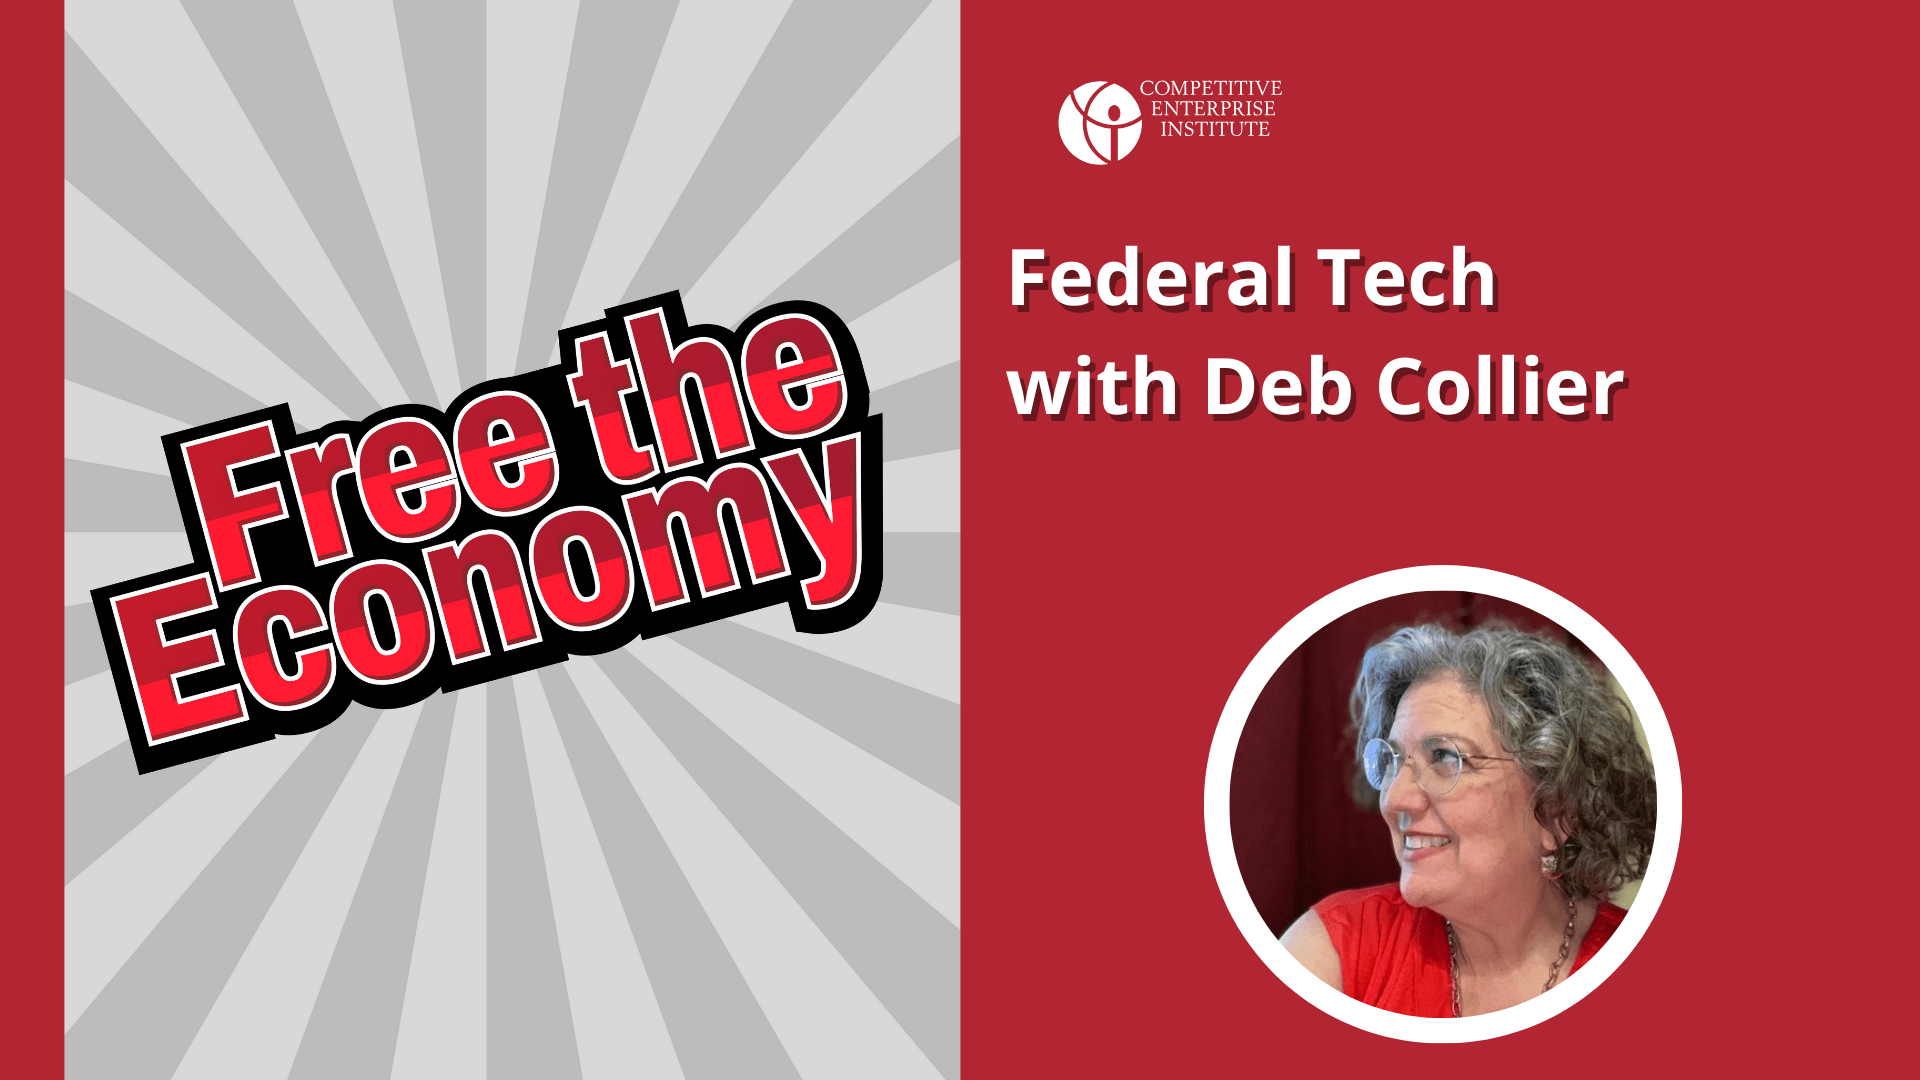 Federal Tech with Deb Collier